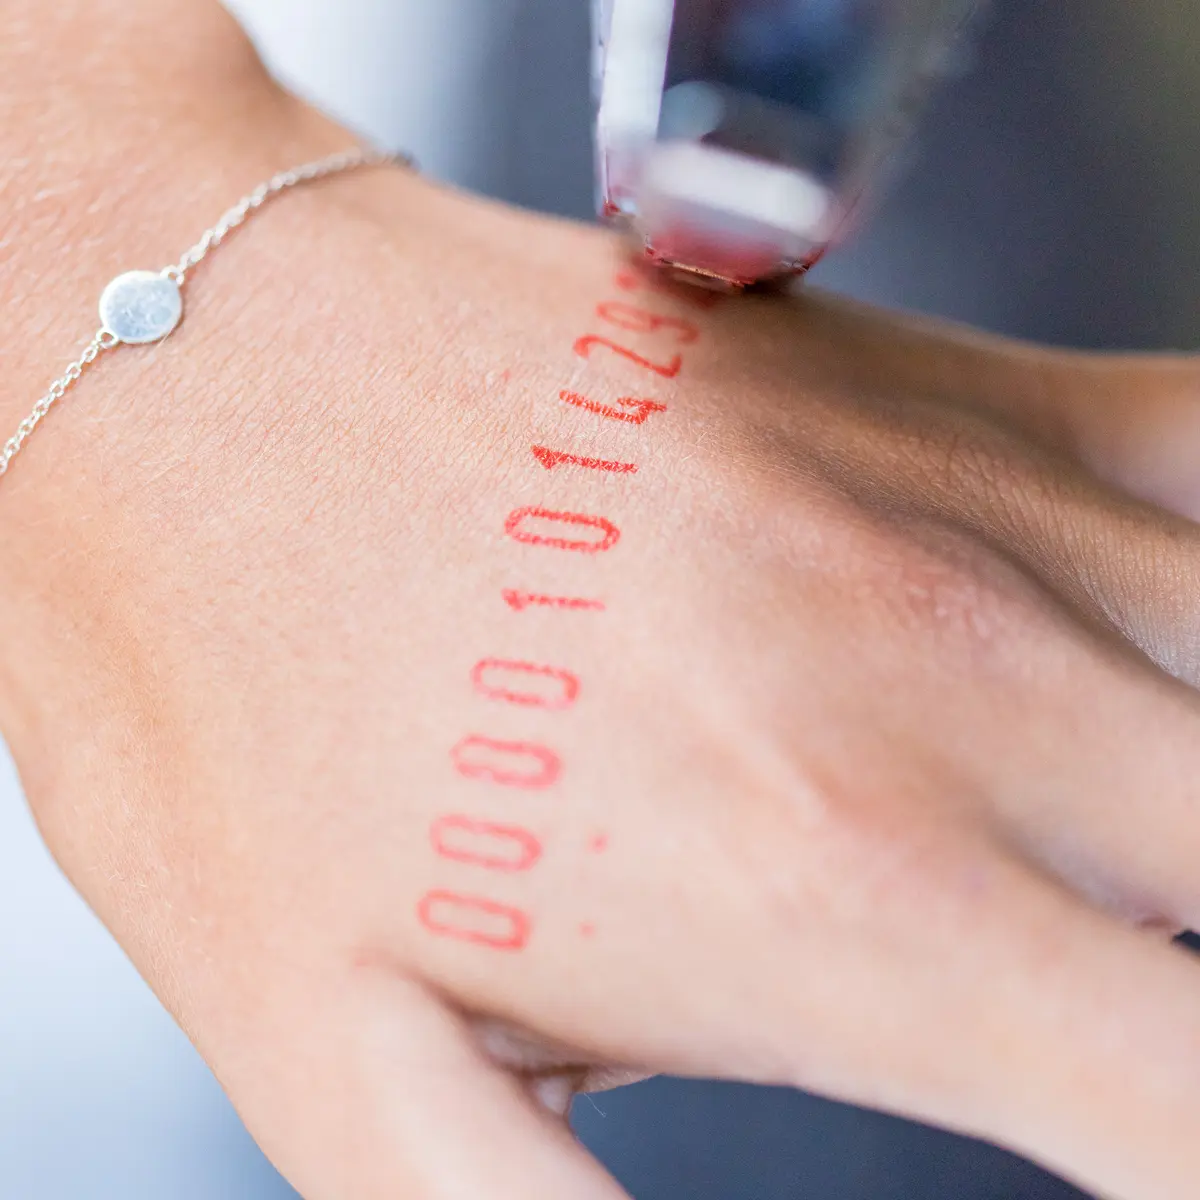 A hand is being stamped with red ink, imprinting a series of numbers onto the skin.